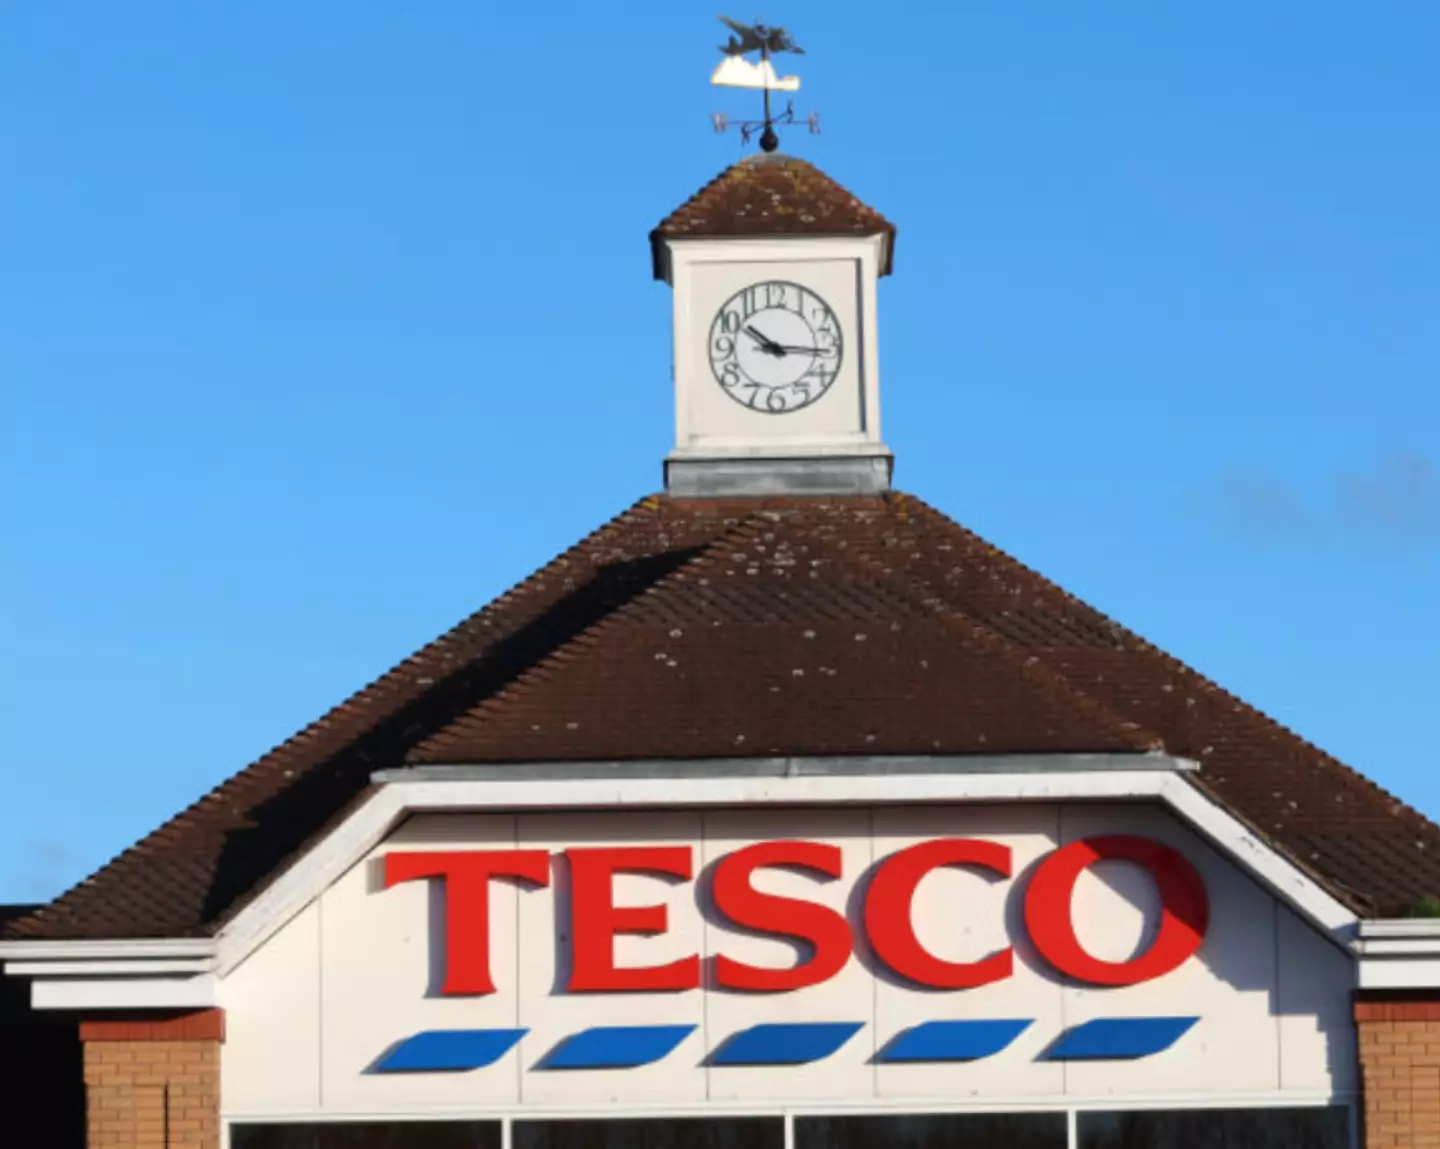 Tesco have sent out their final warning to Tesco Clubcard holders, urging them to take advantage of their rewards.